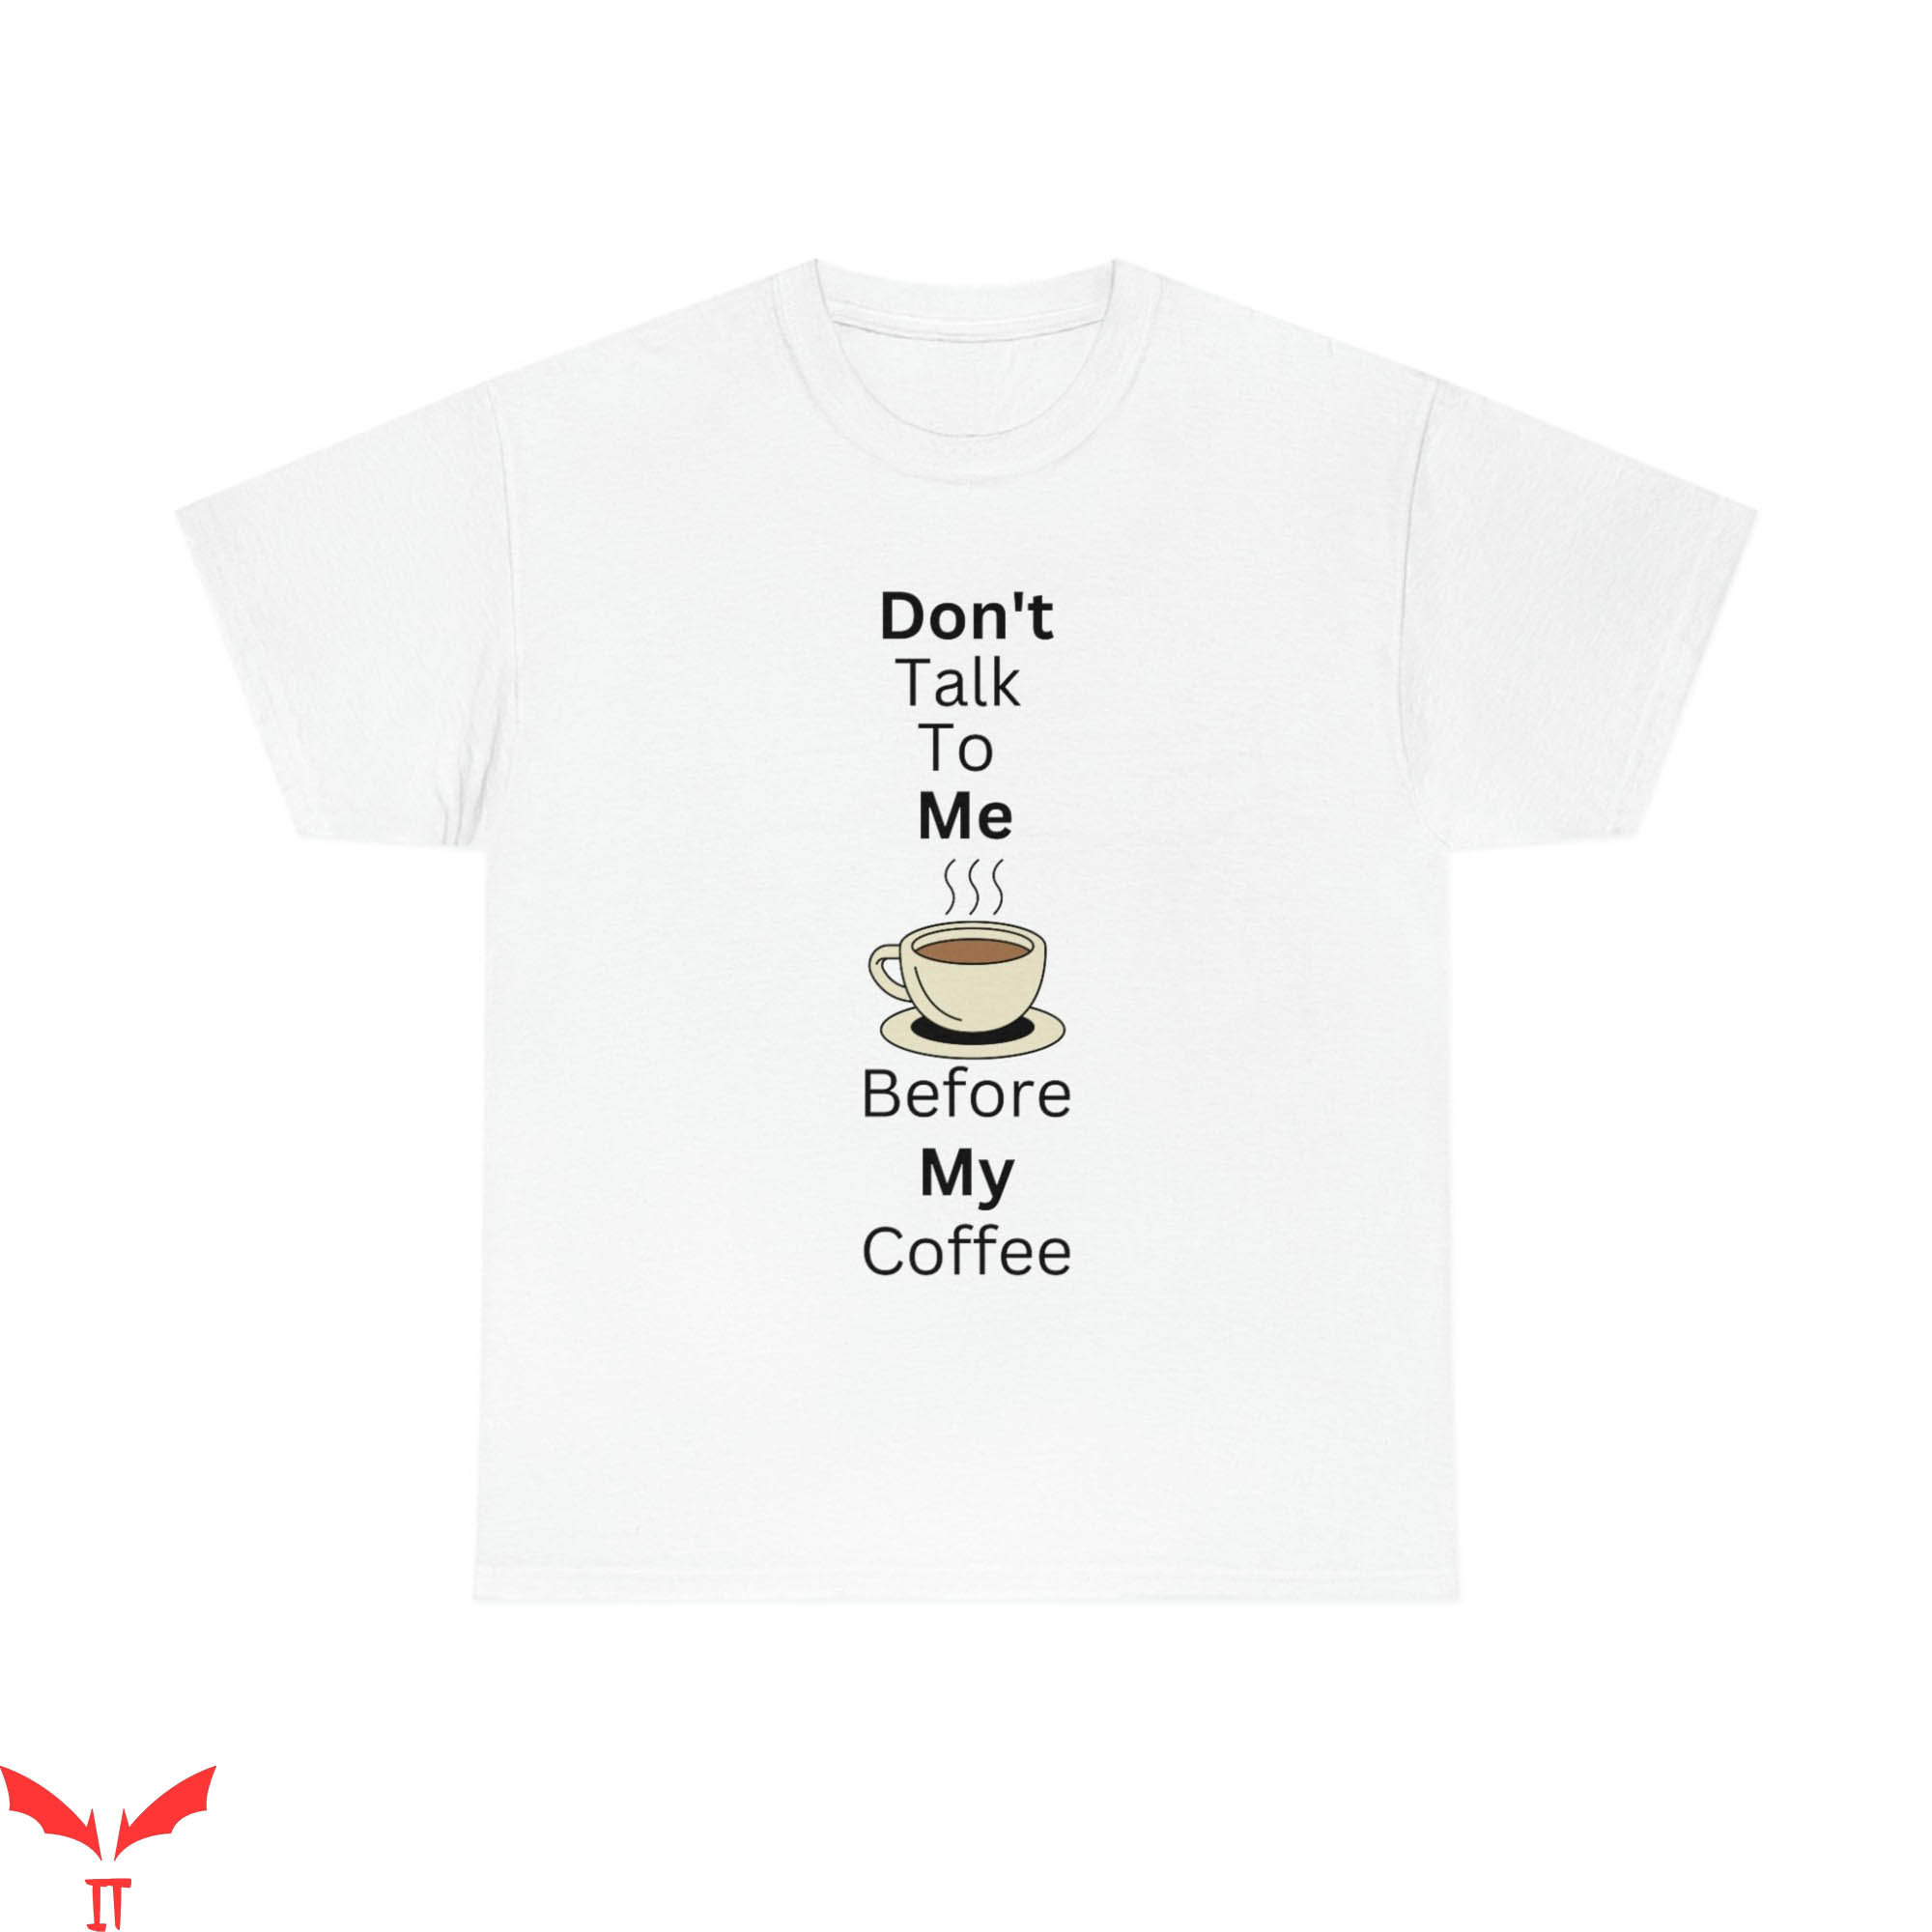 Don't Talk To Me T-Shirt Before My Coffee Tee Shirt